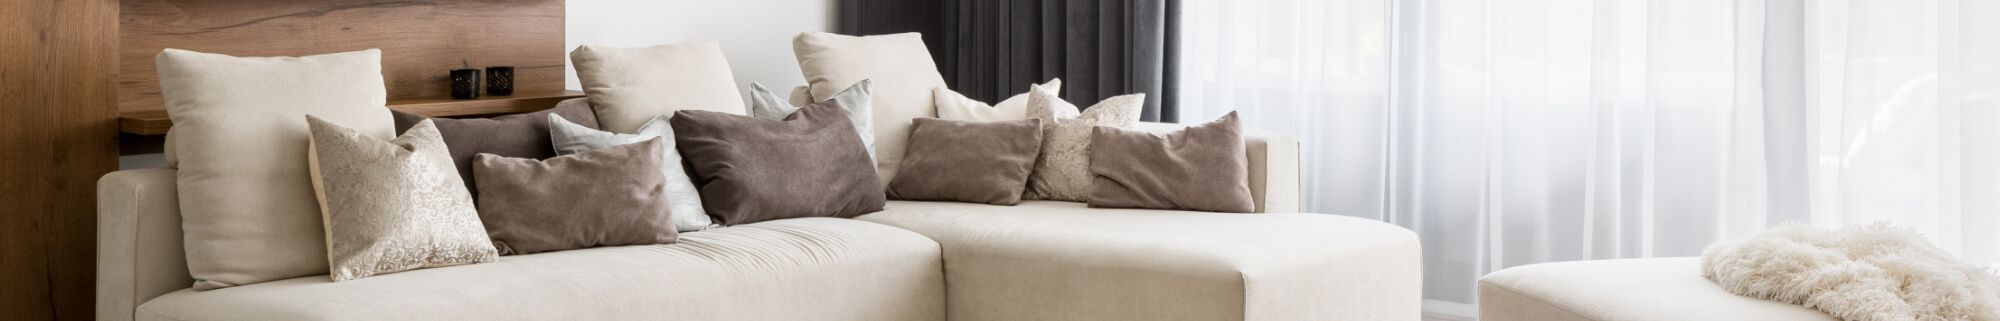 How to Style Throw Pillow On a Couch